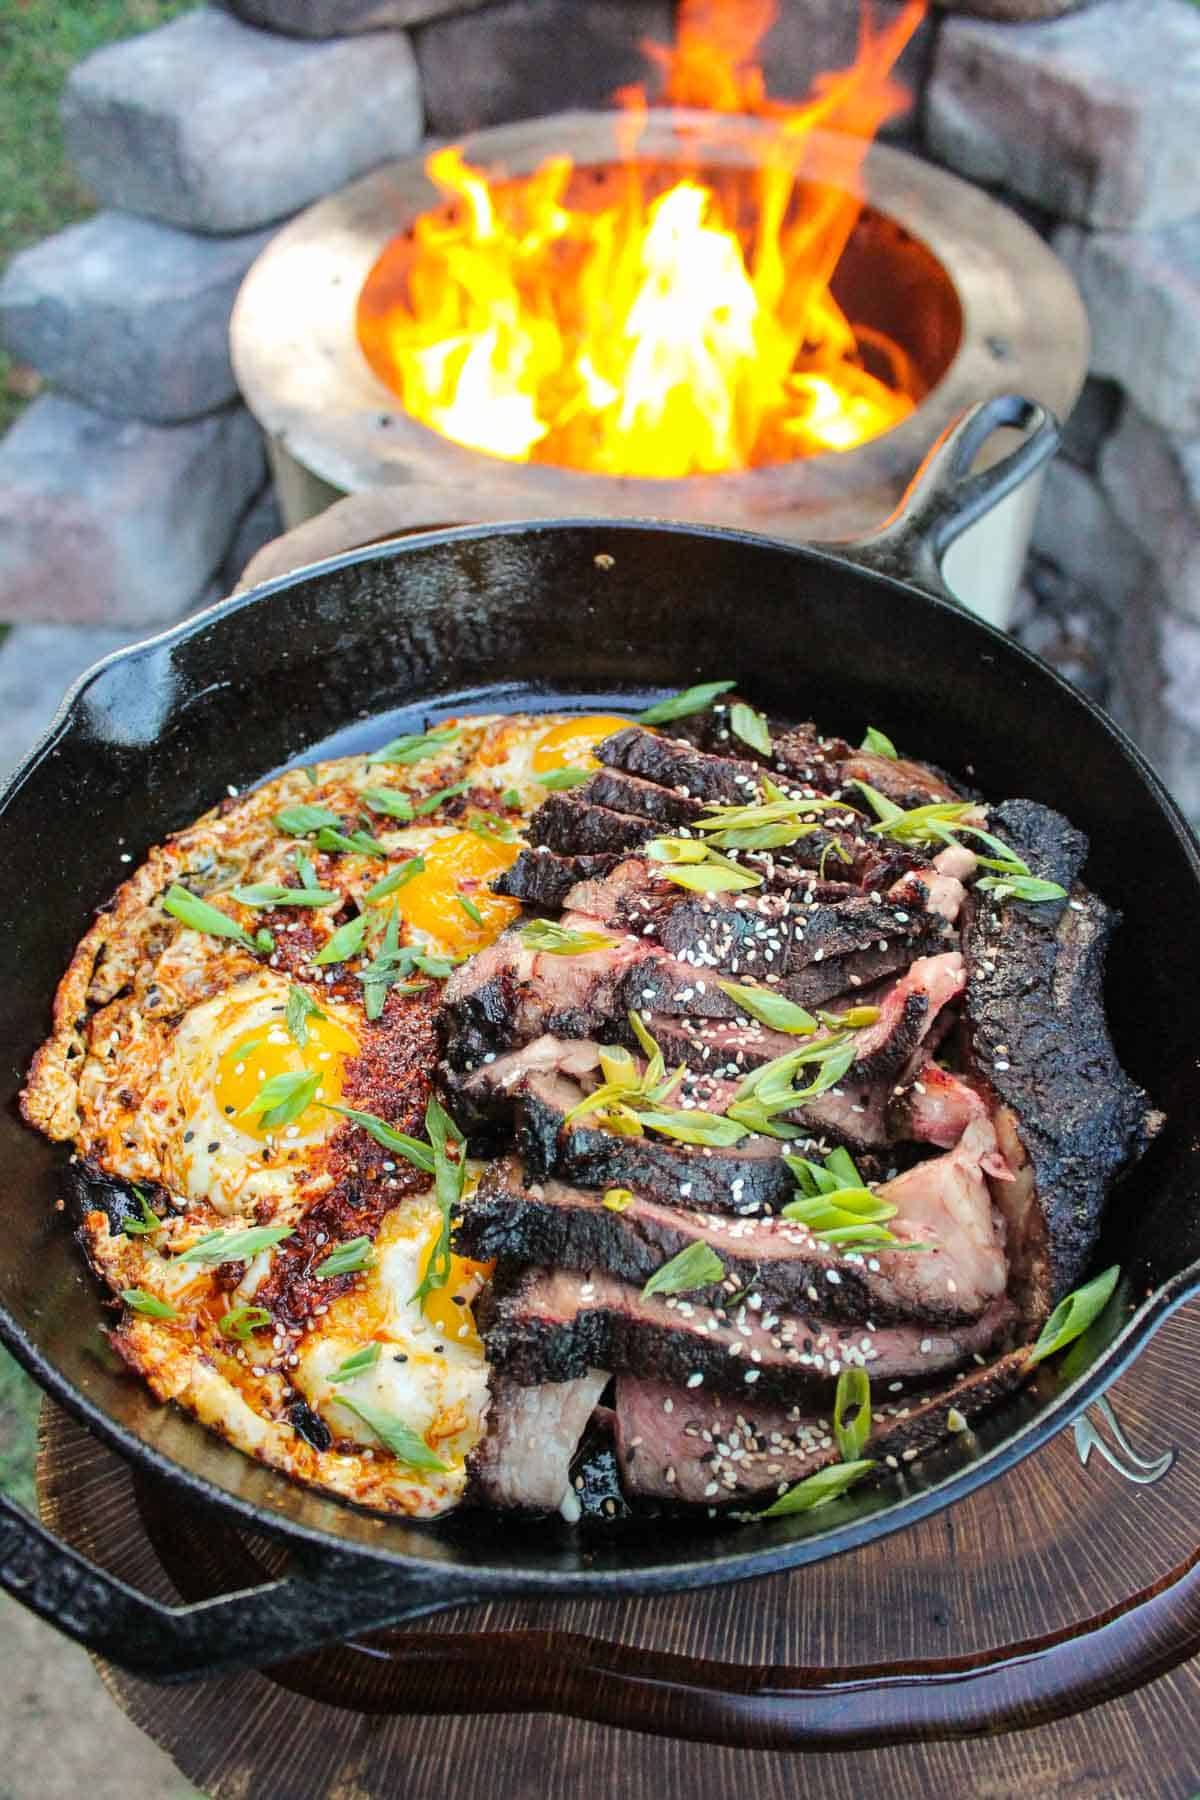 a skillet filled with steak and chili oil eggs by a fire